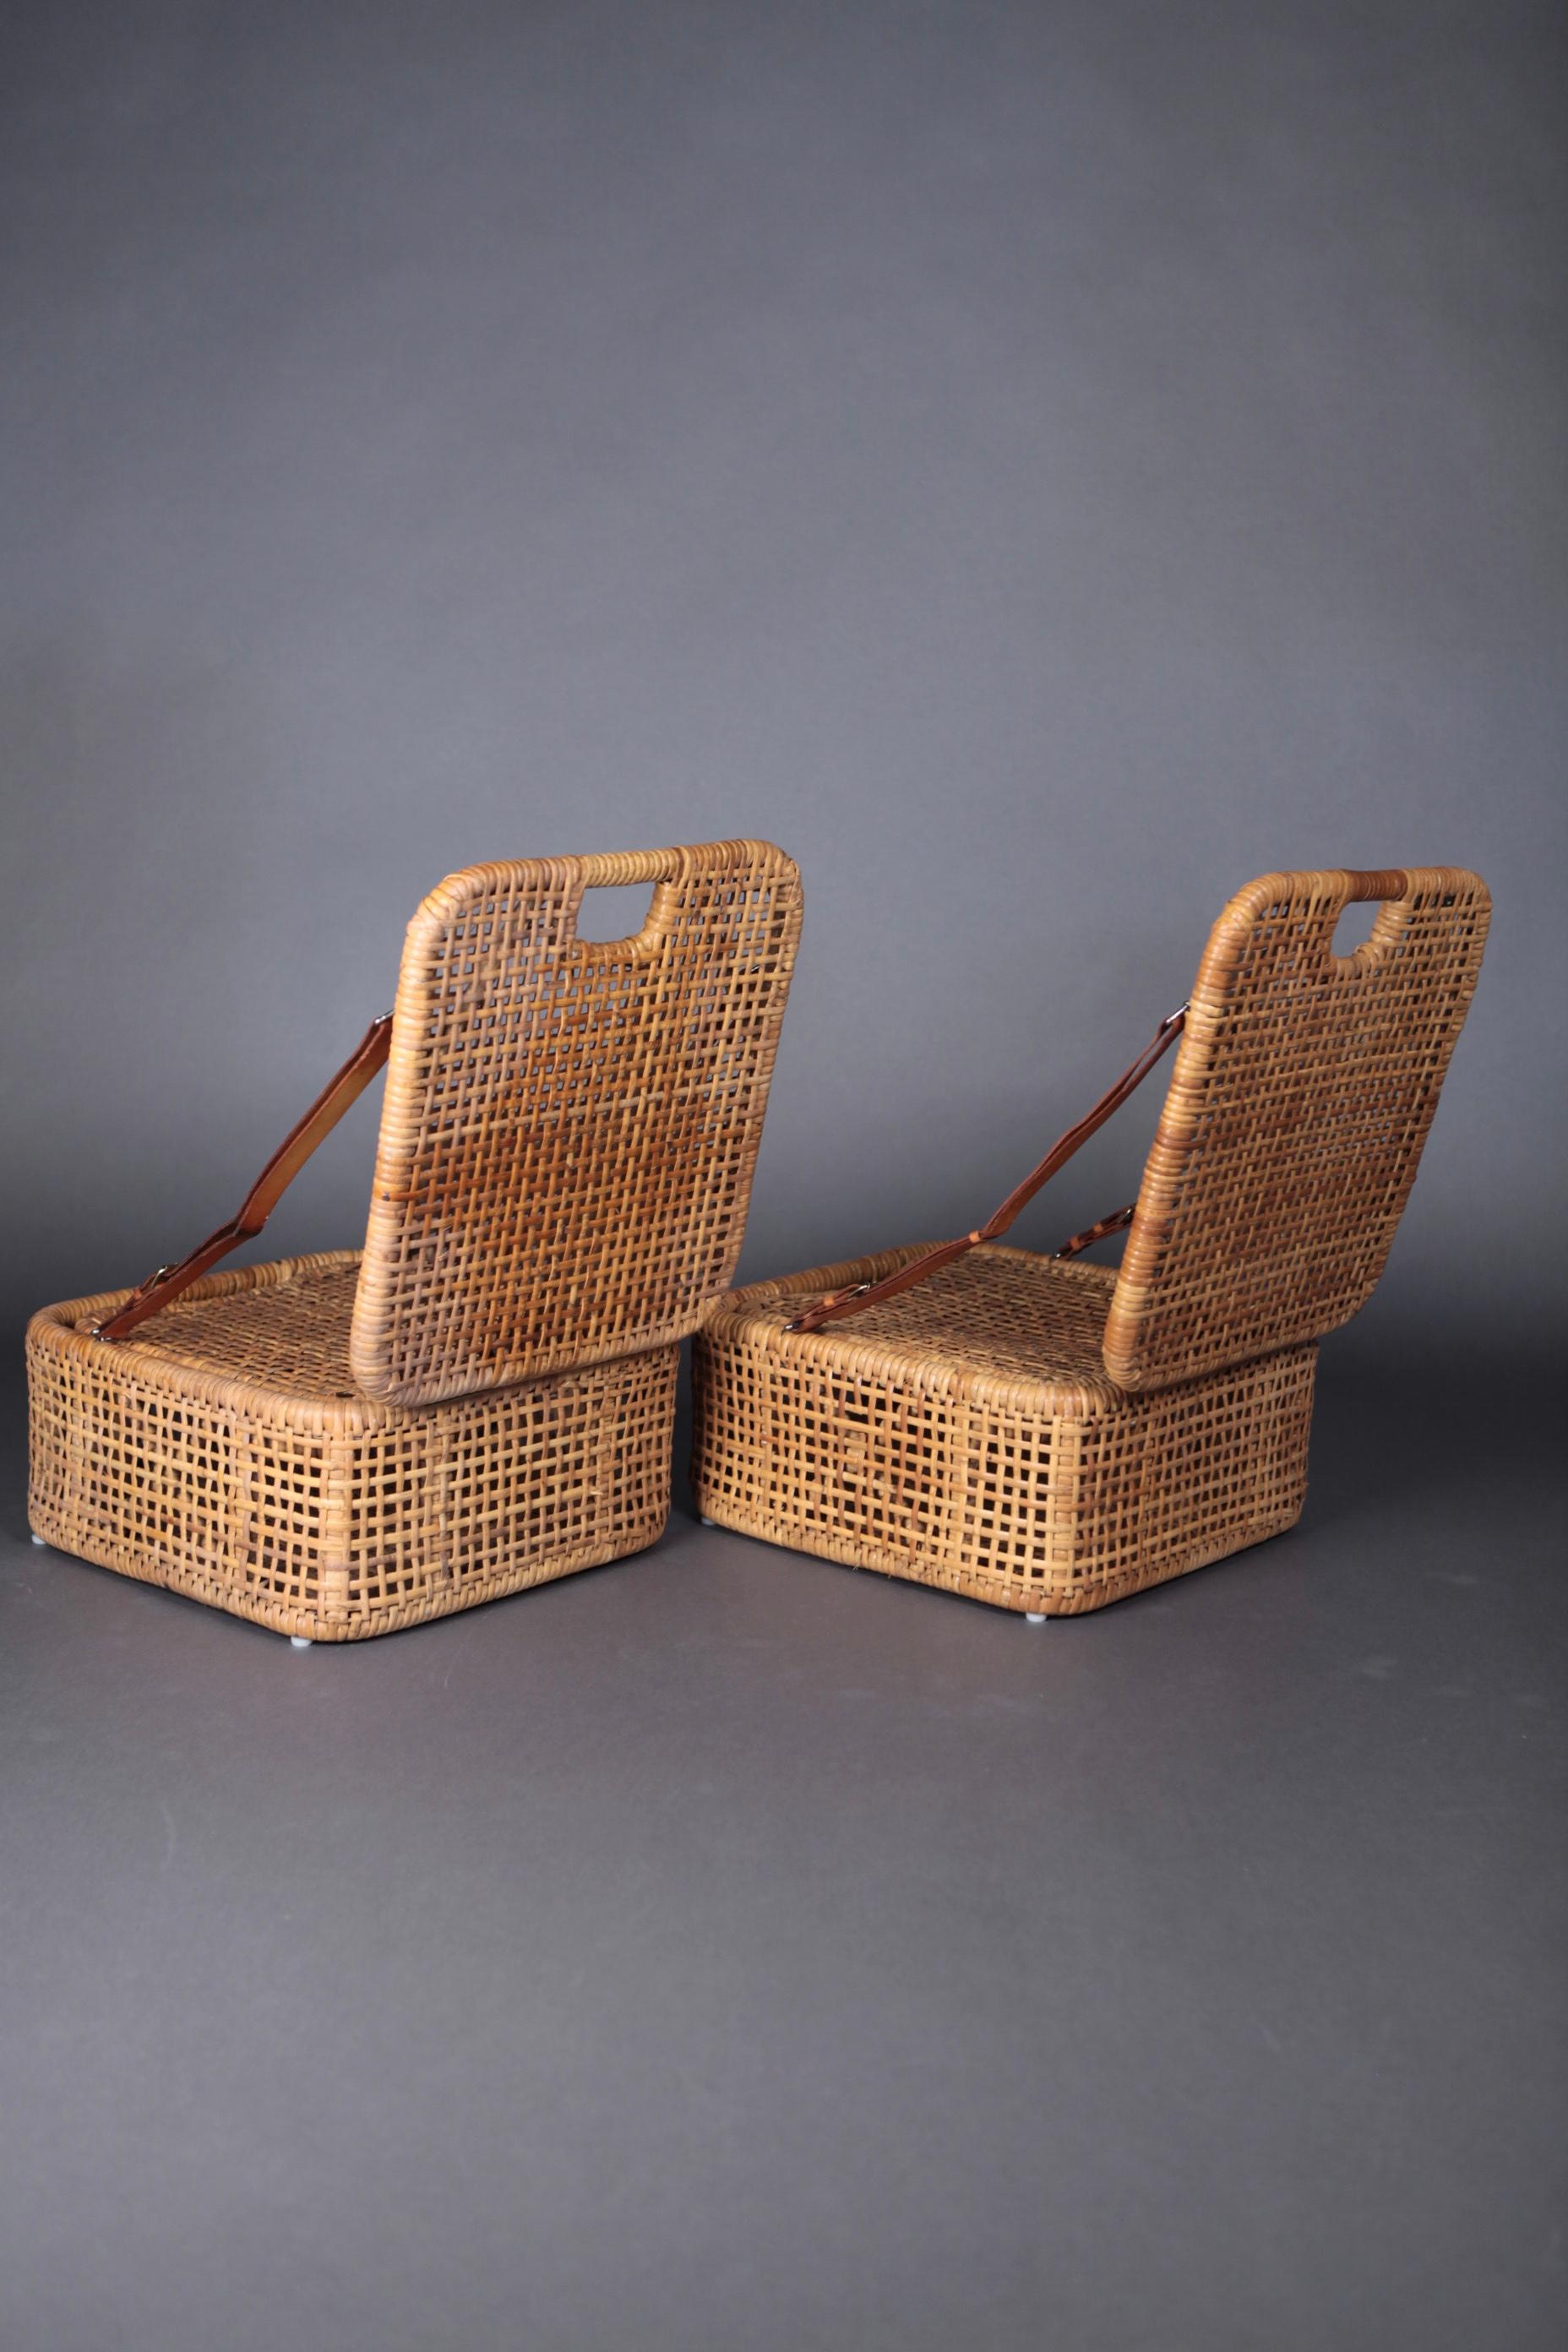 Swedish Picnic Chairs, Cane and Leather, Sweden, 1950s